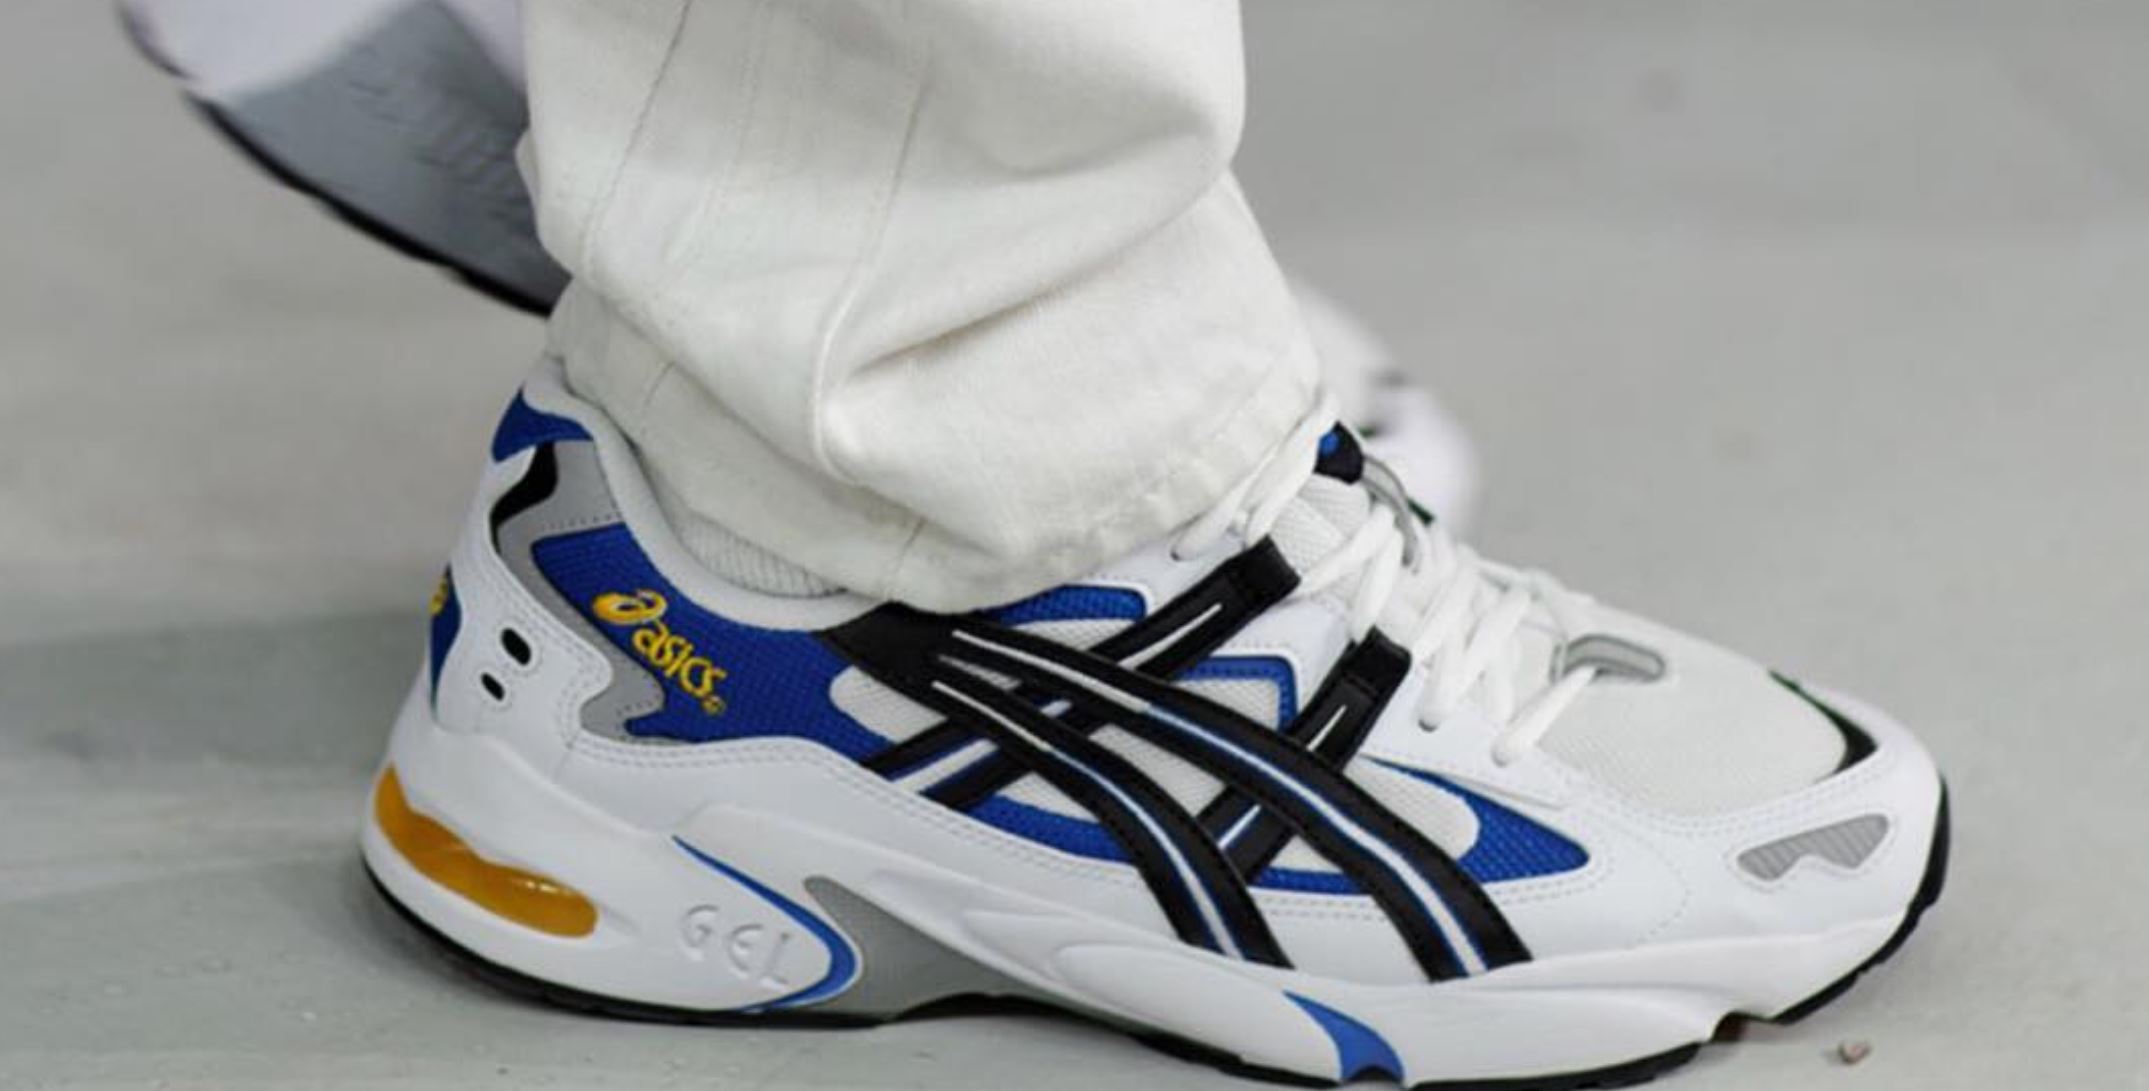 leninismo repentinamente toxicidad An Asics Gel Kayano 5 Retro Was Spotted at Paris Fashion Week - WearTesters